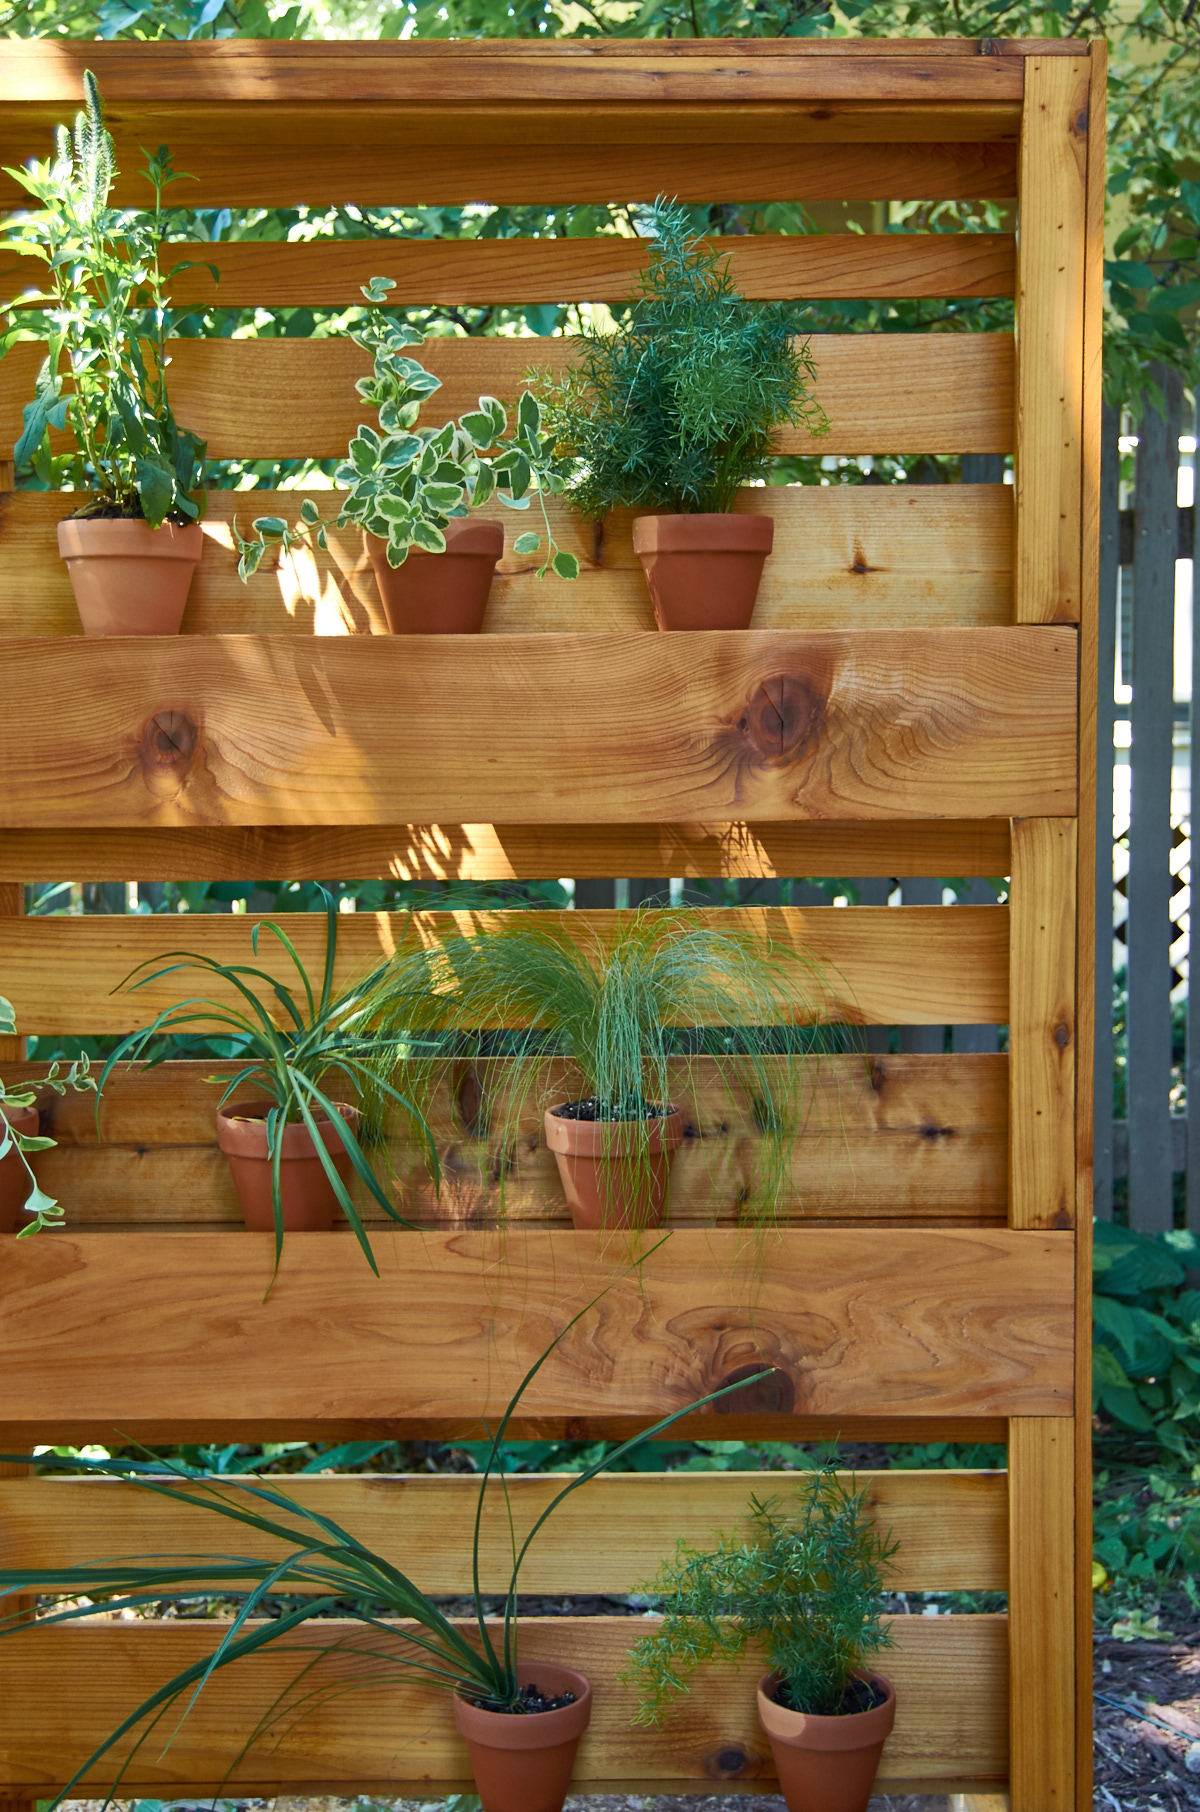 Potted plants are in the wooden shelf in the garden.